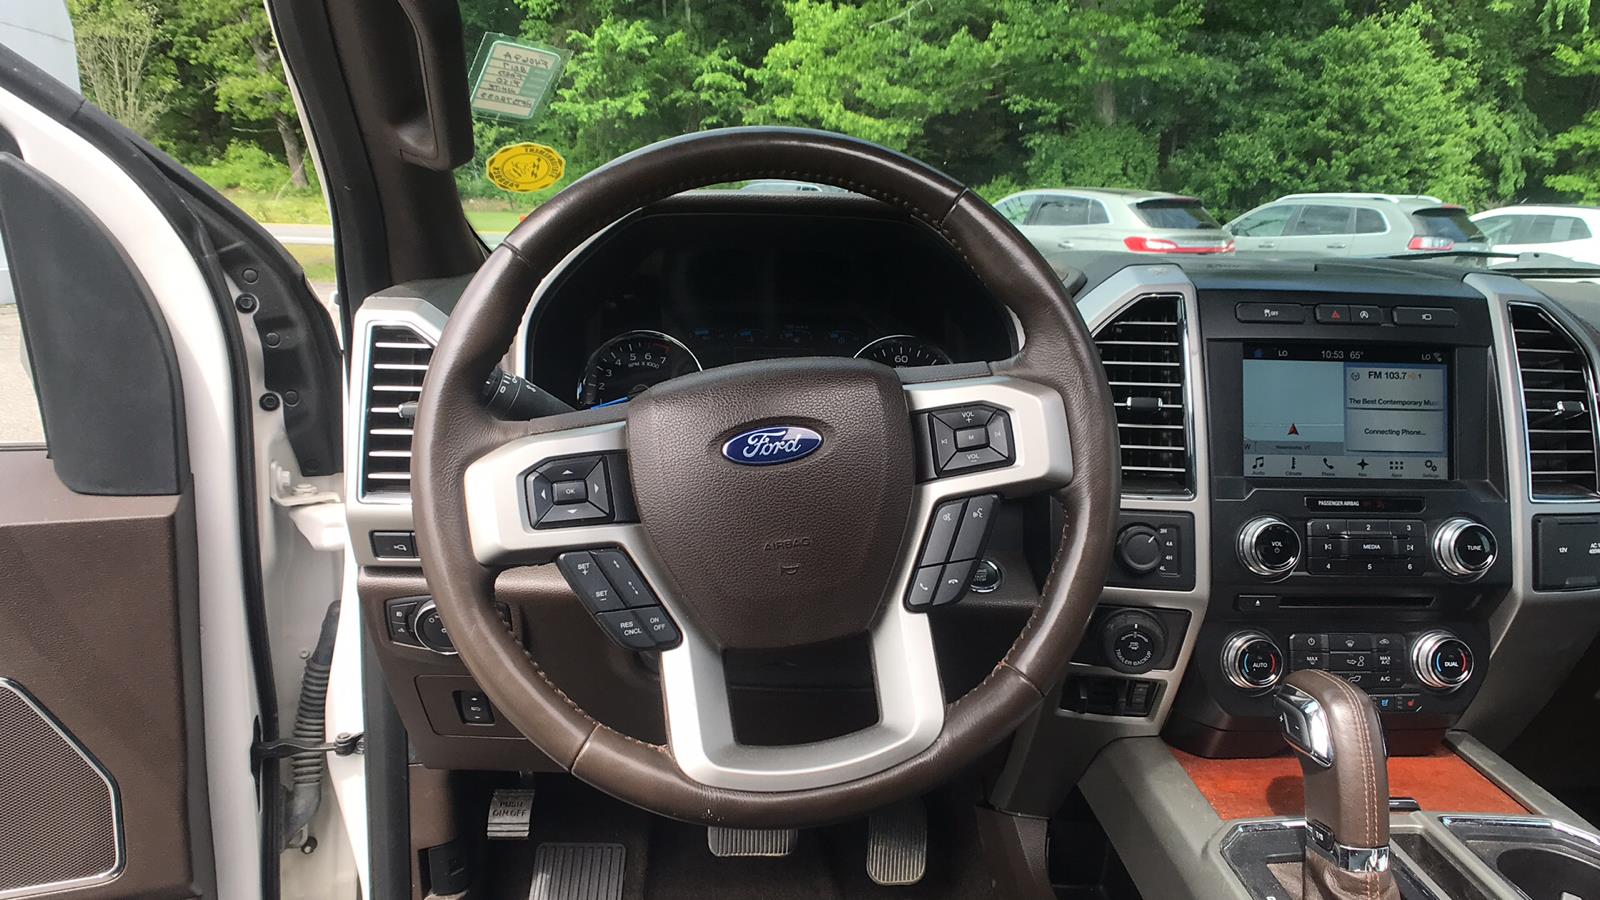 2017 Ford F-150 Short Bed